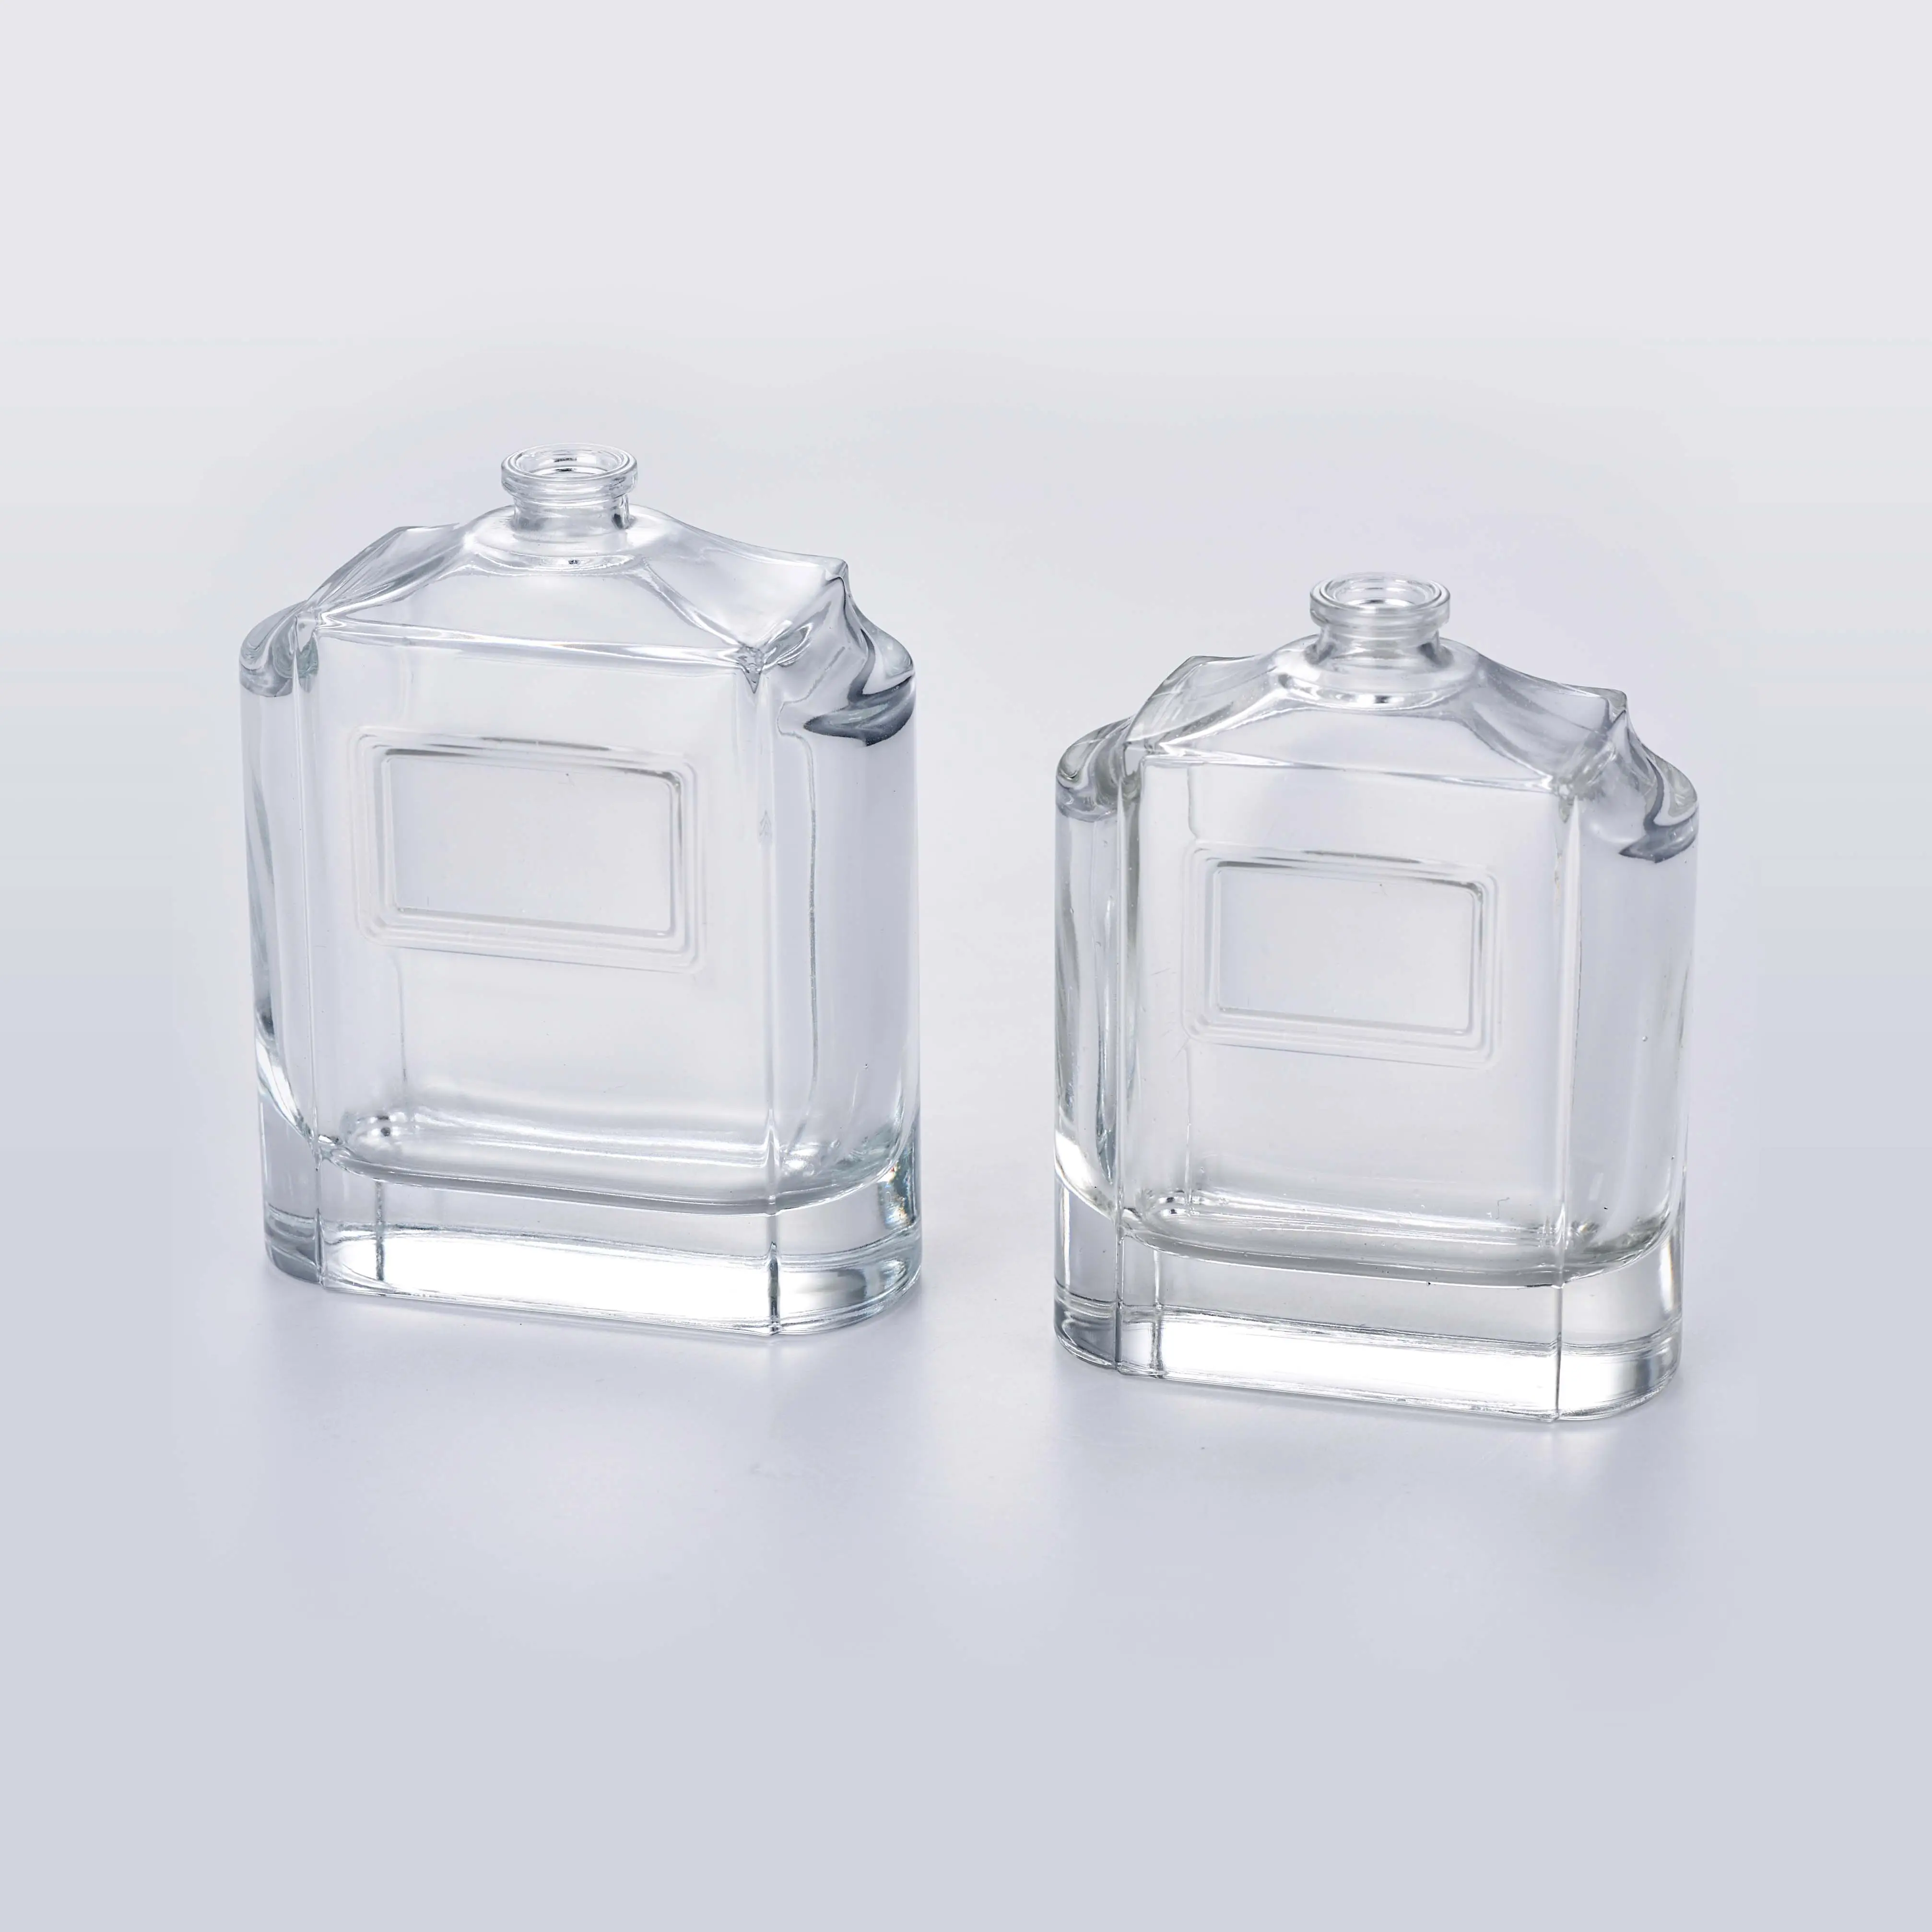 ANRAN empty glass perfume bottles for perfume bottles manufacturers